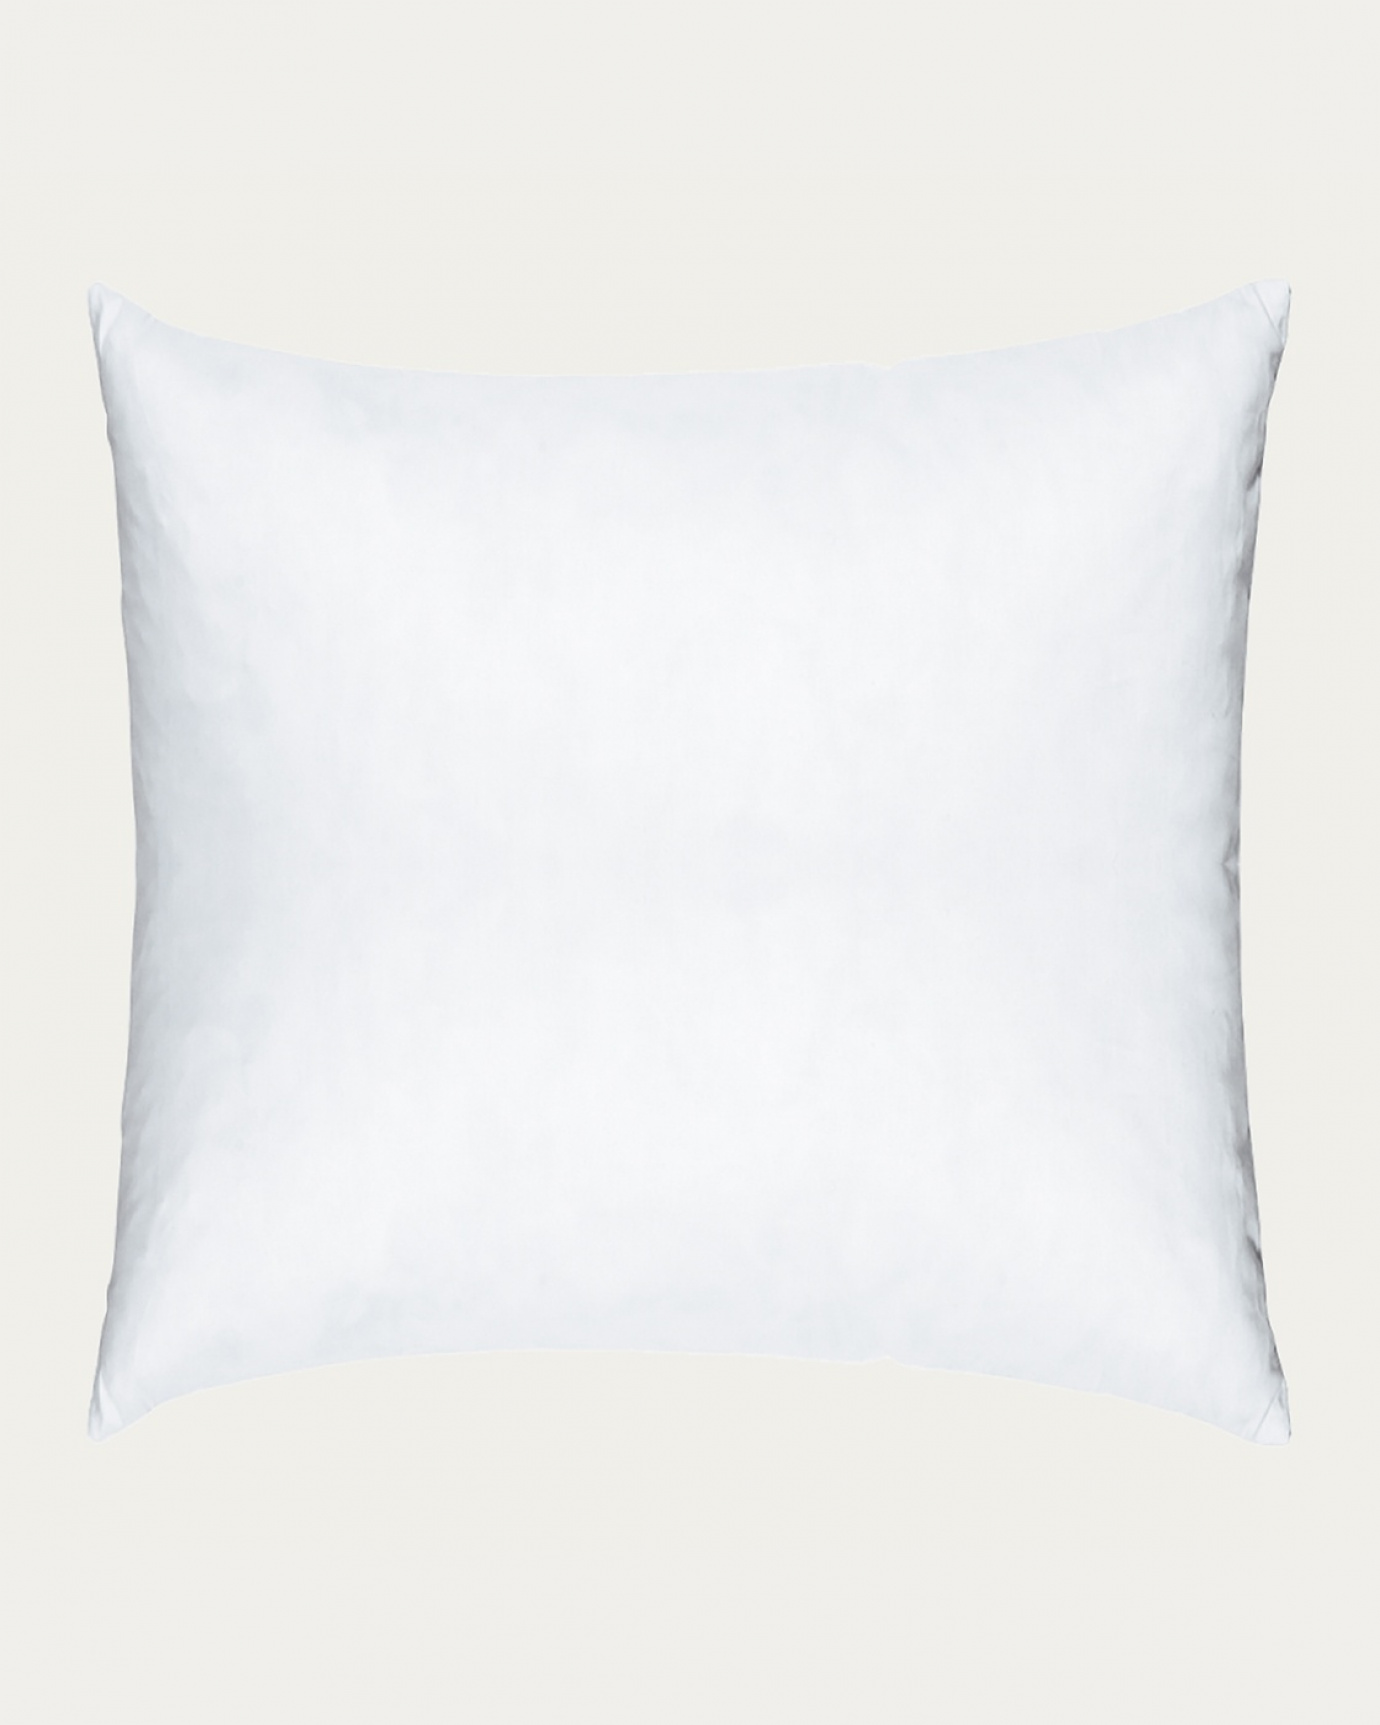 Product image white FEATHER cushion insert made of cotton with feather filling from LINUM DESIGN. Size 60x60 cm.